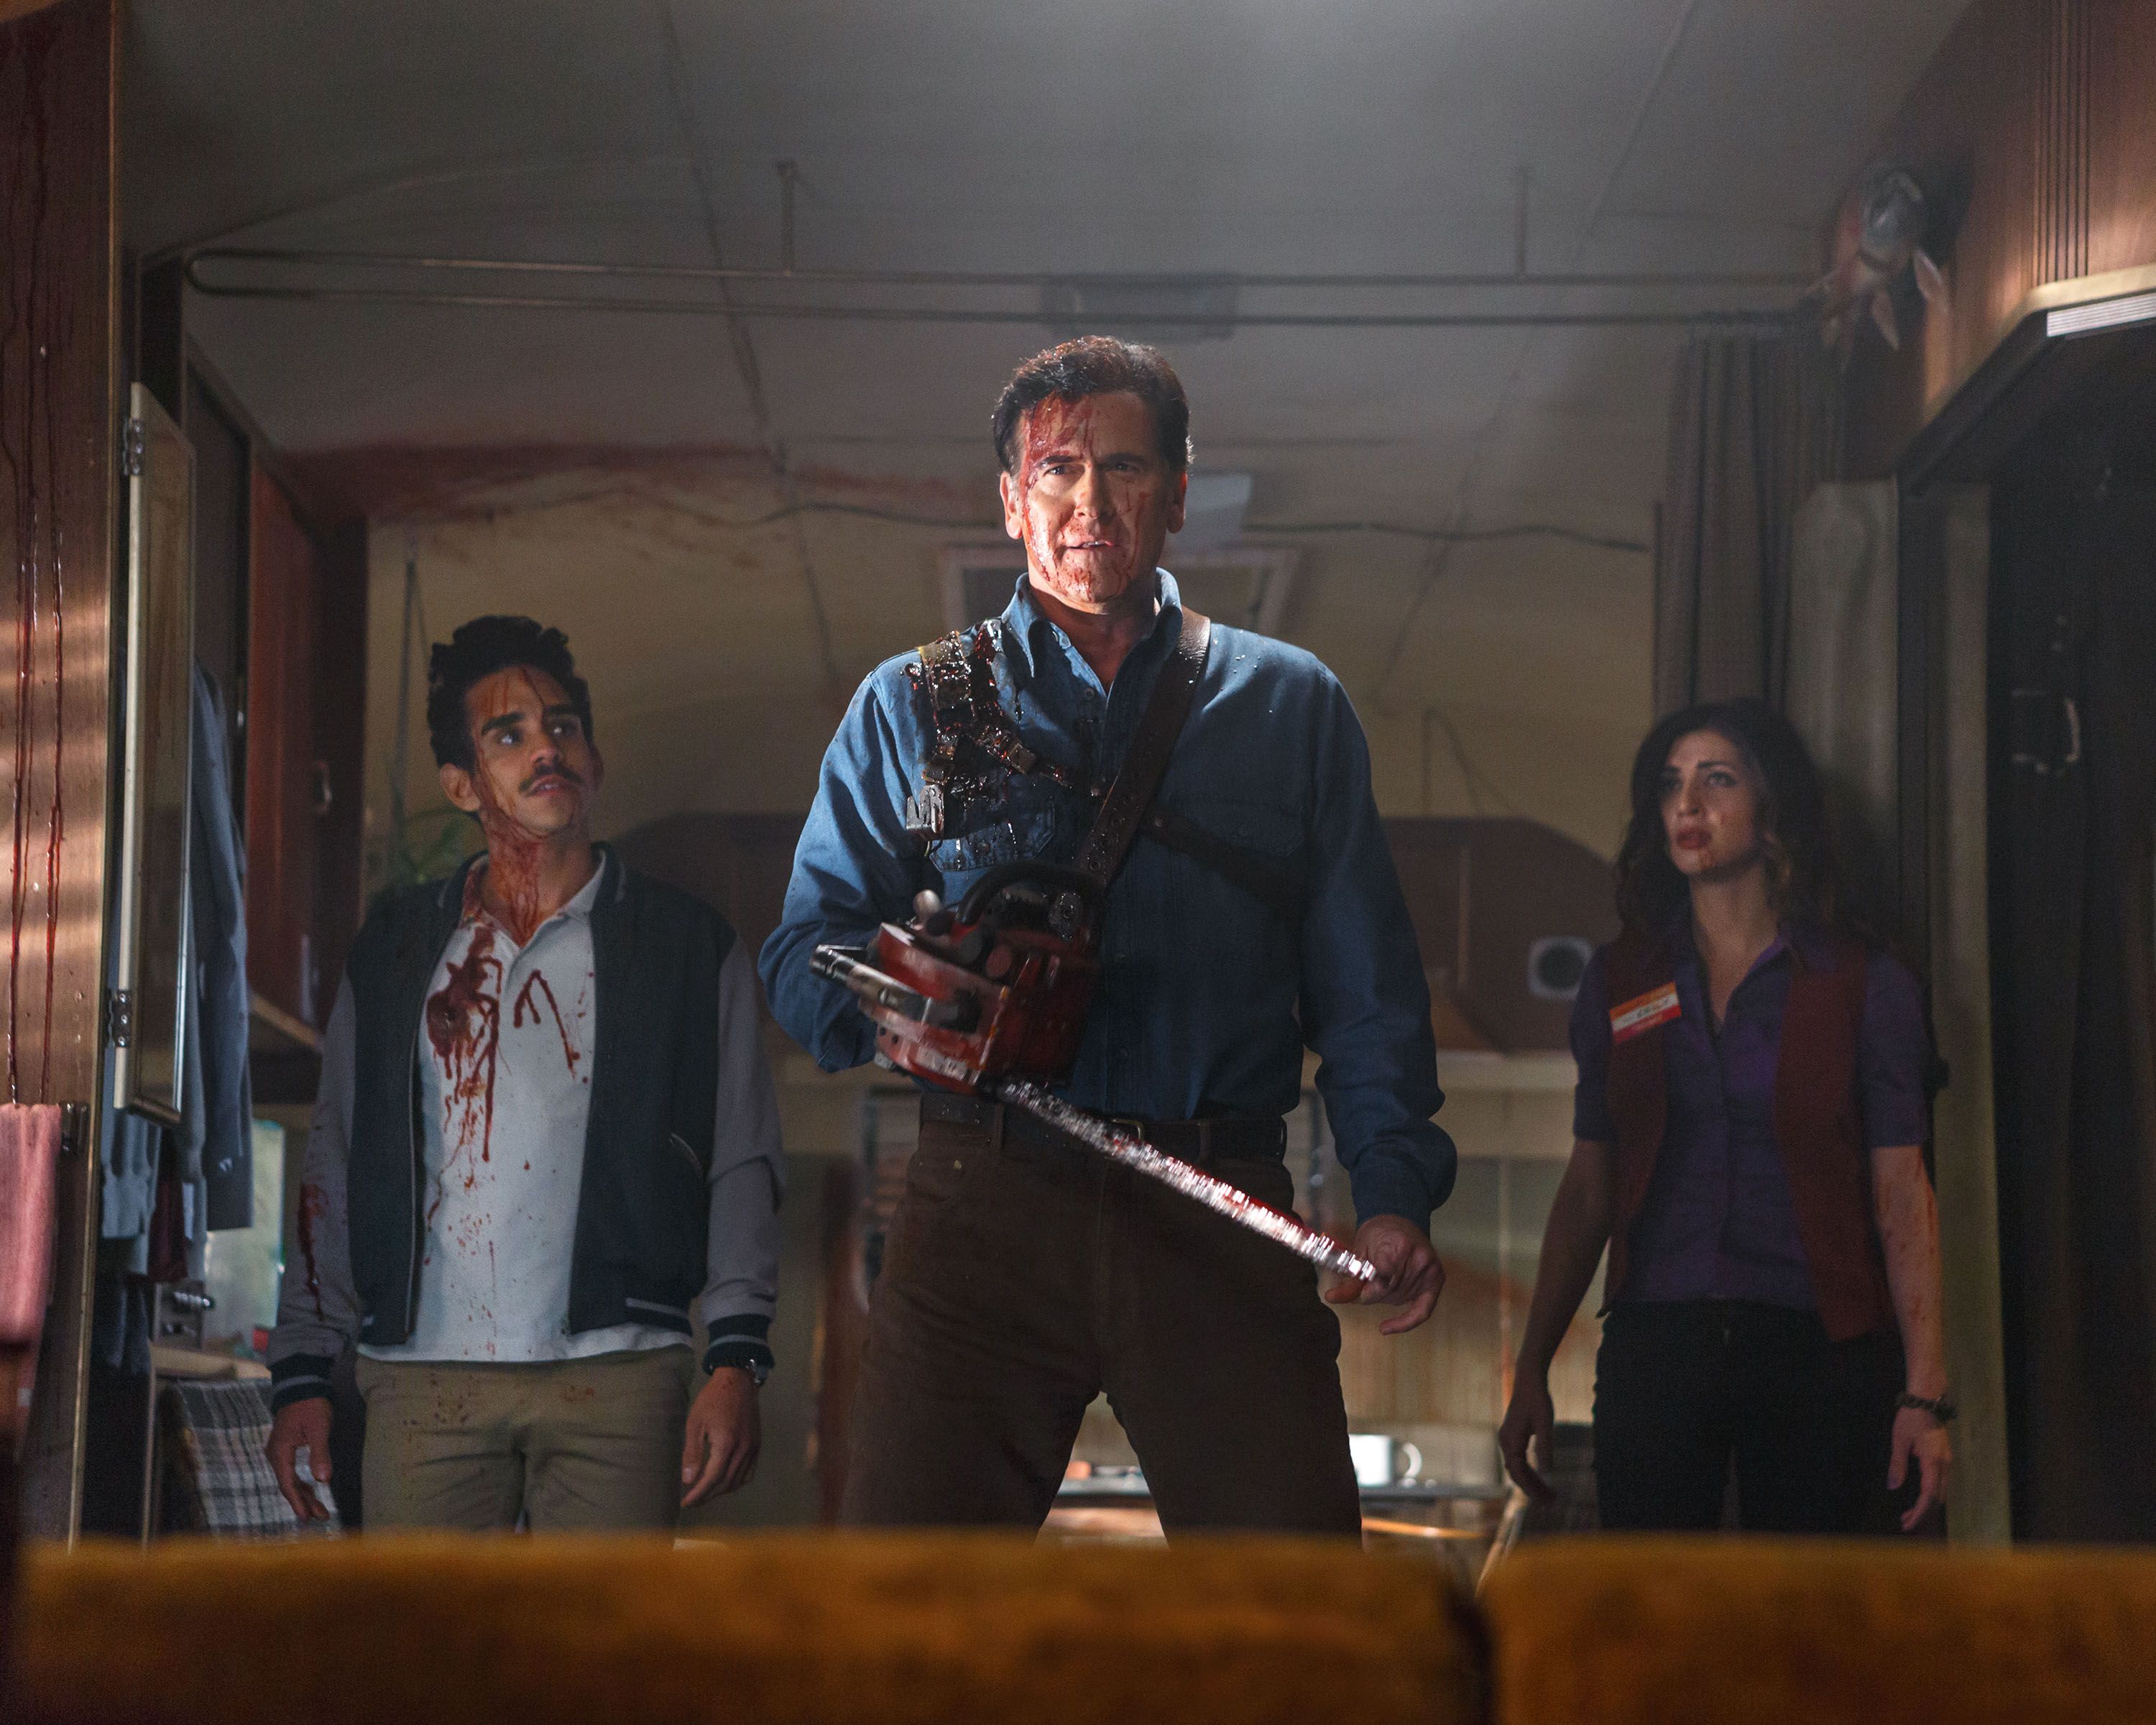 Evil Dead Rise': cast and crew tell all before release - Technique